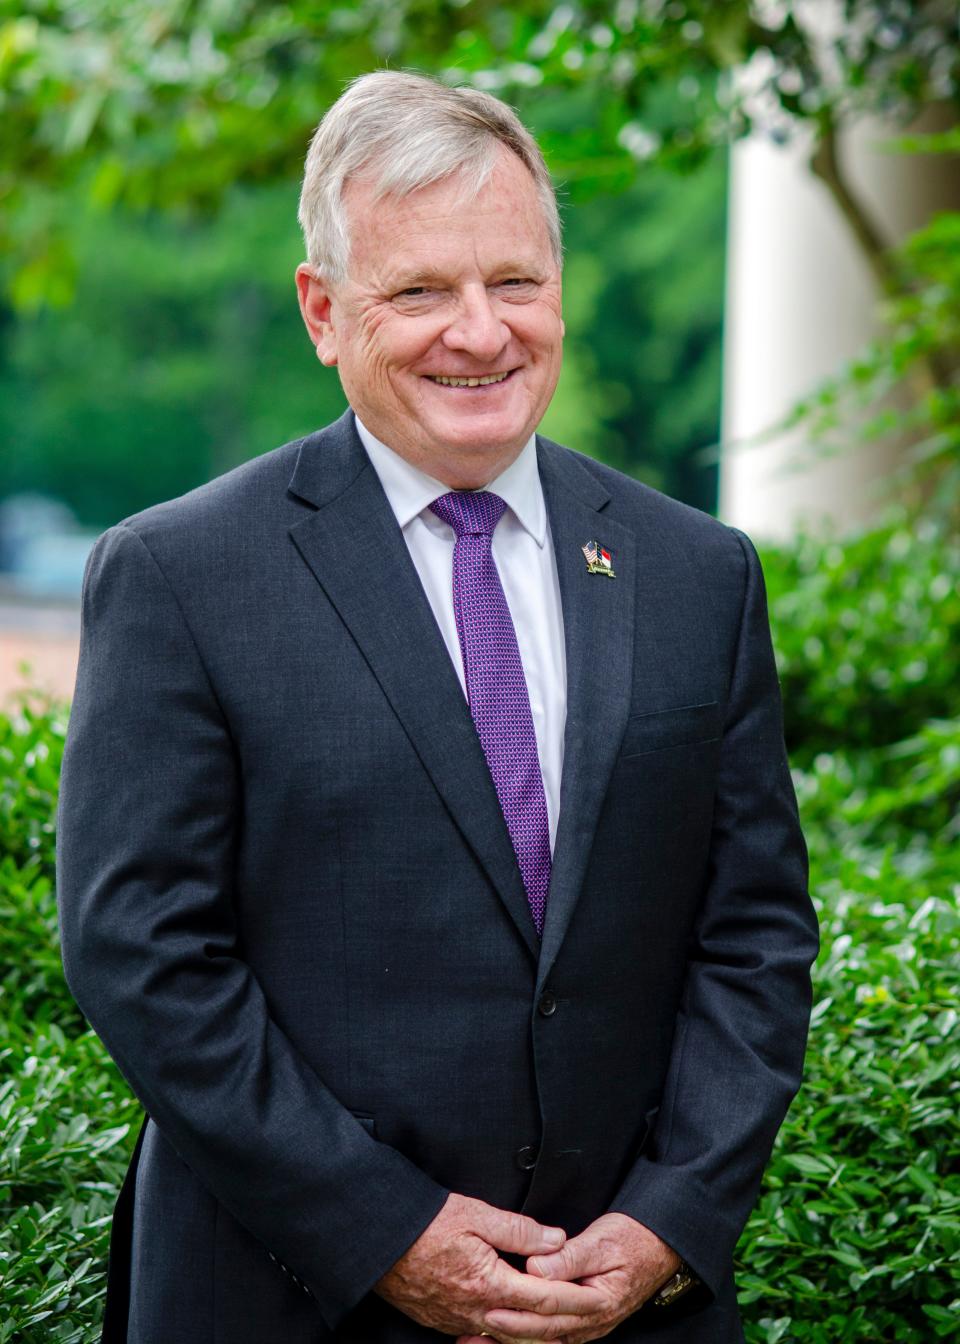 North Carolina Governor candidate Dale Folwell